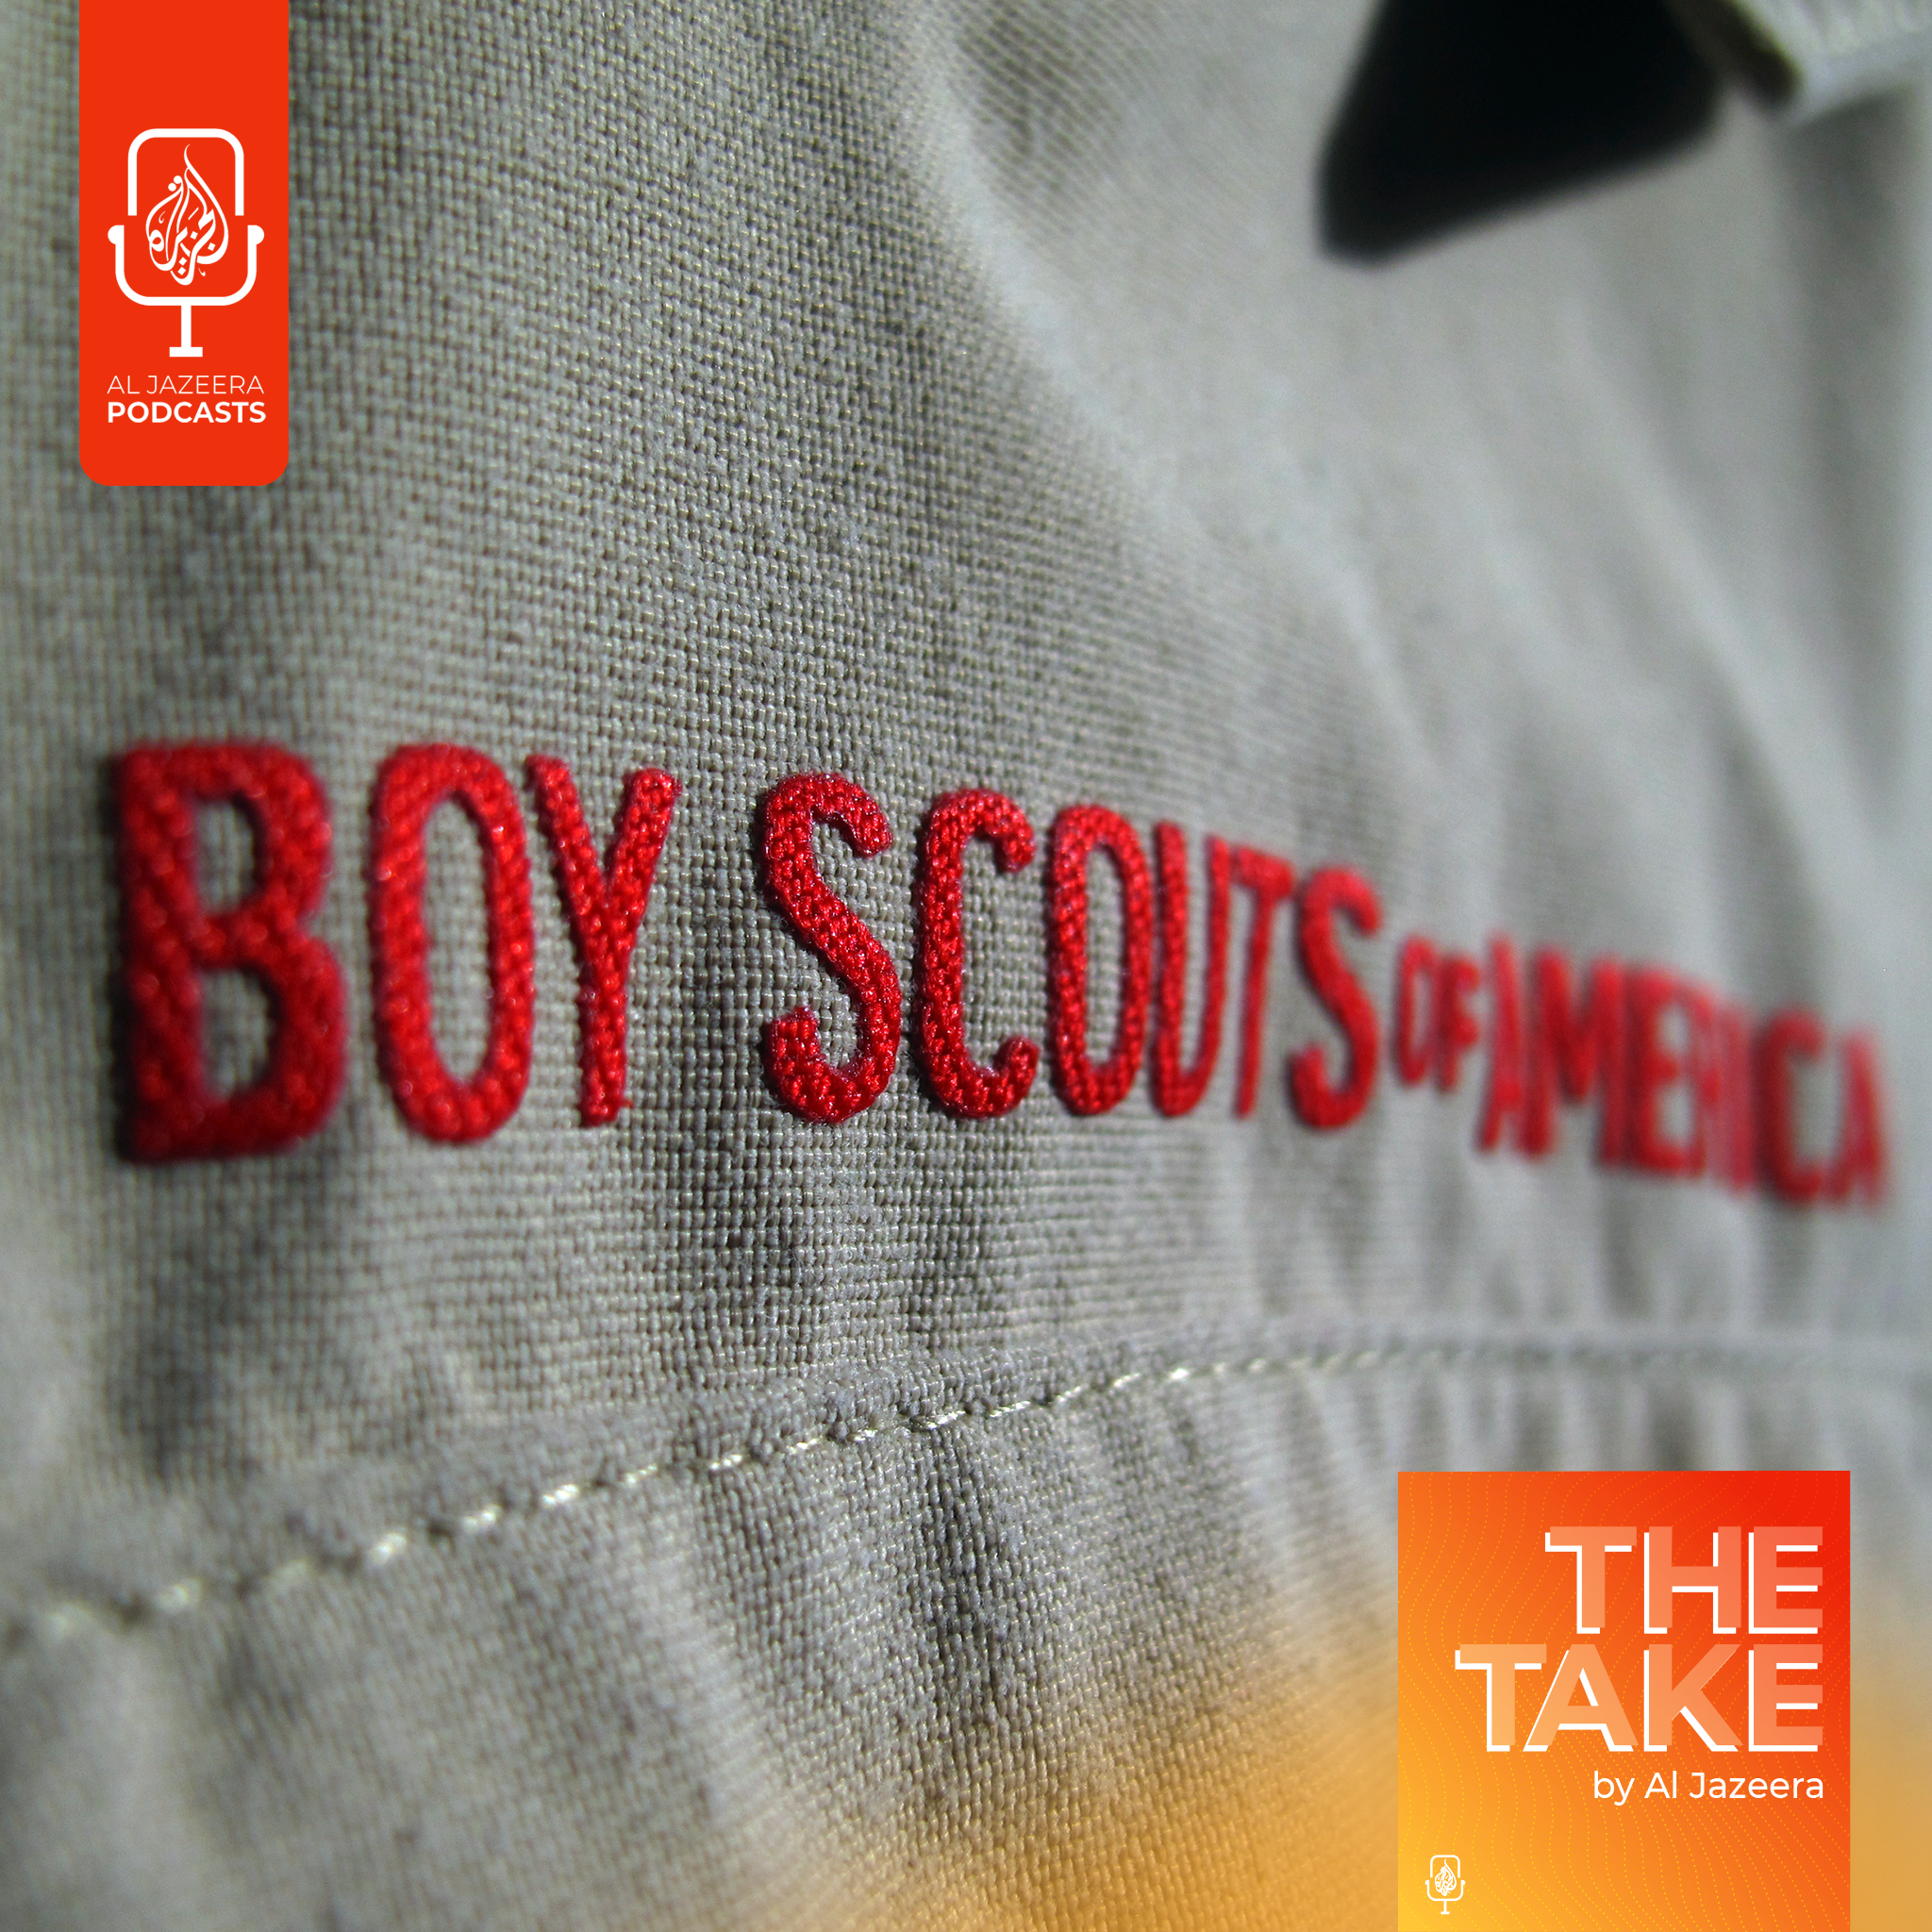 Inside the Boy Scouts of America sex abuse scandal